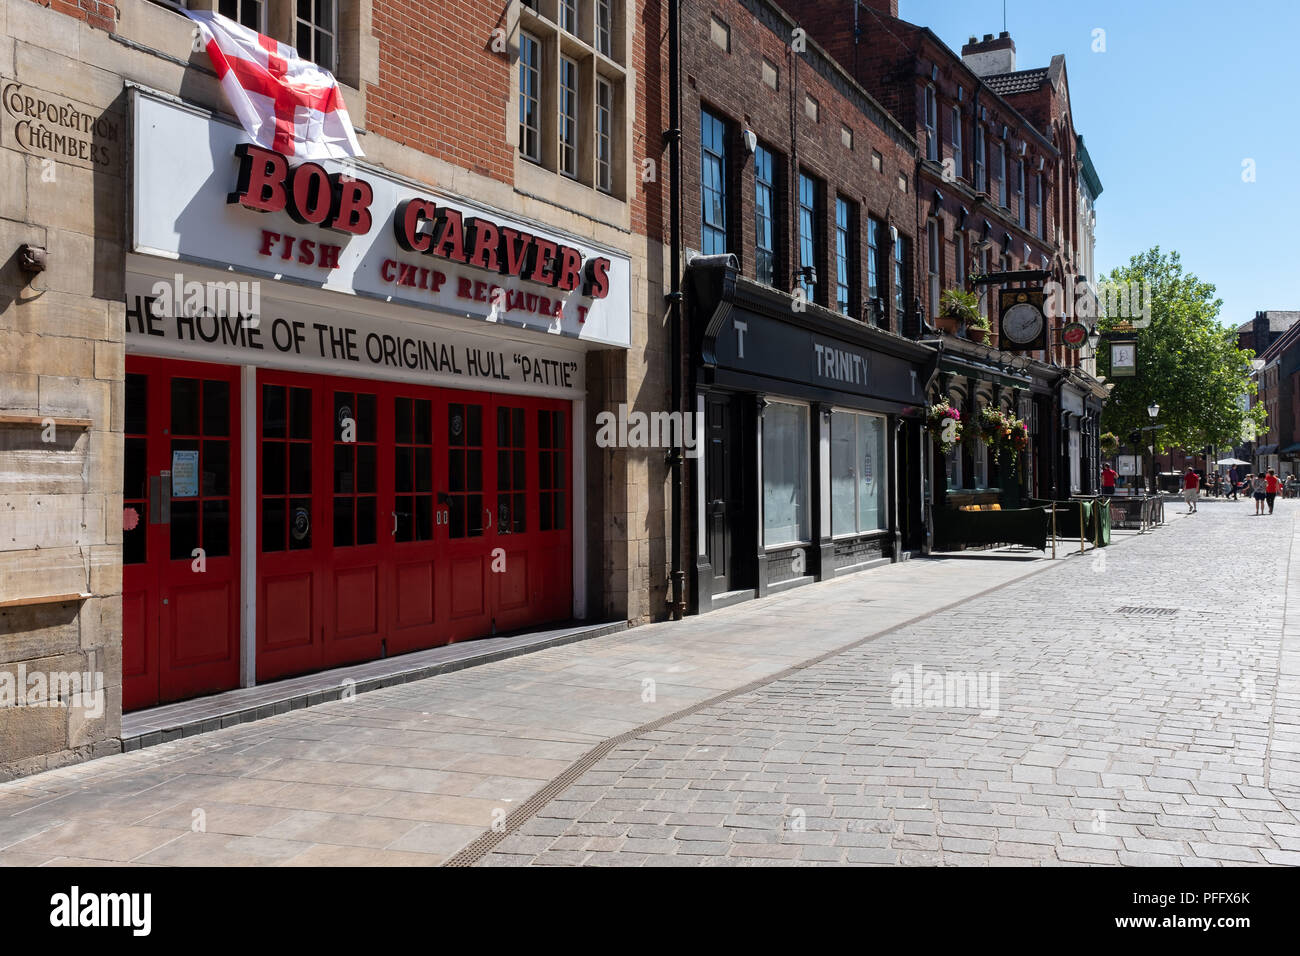 Image of Kingston Upon Hull UK City of Culture 2017. Bob Carvers chip shop is a famous local establishment. Stock Photo